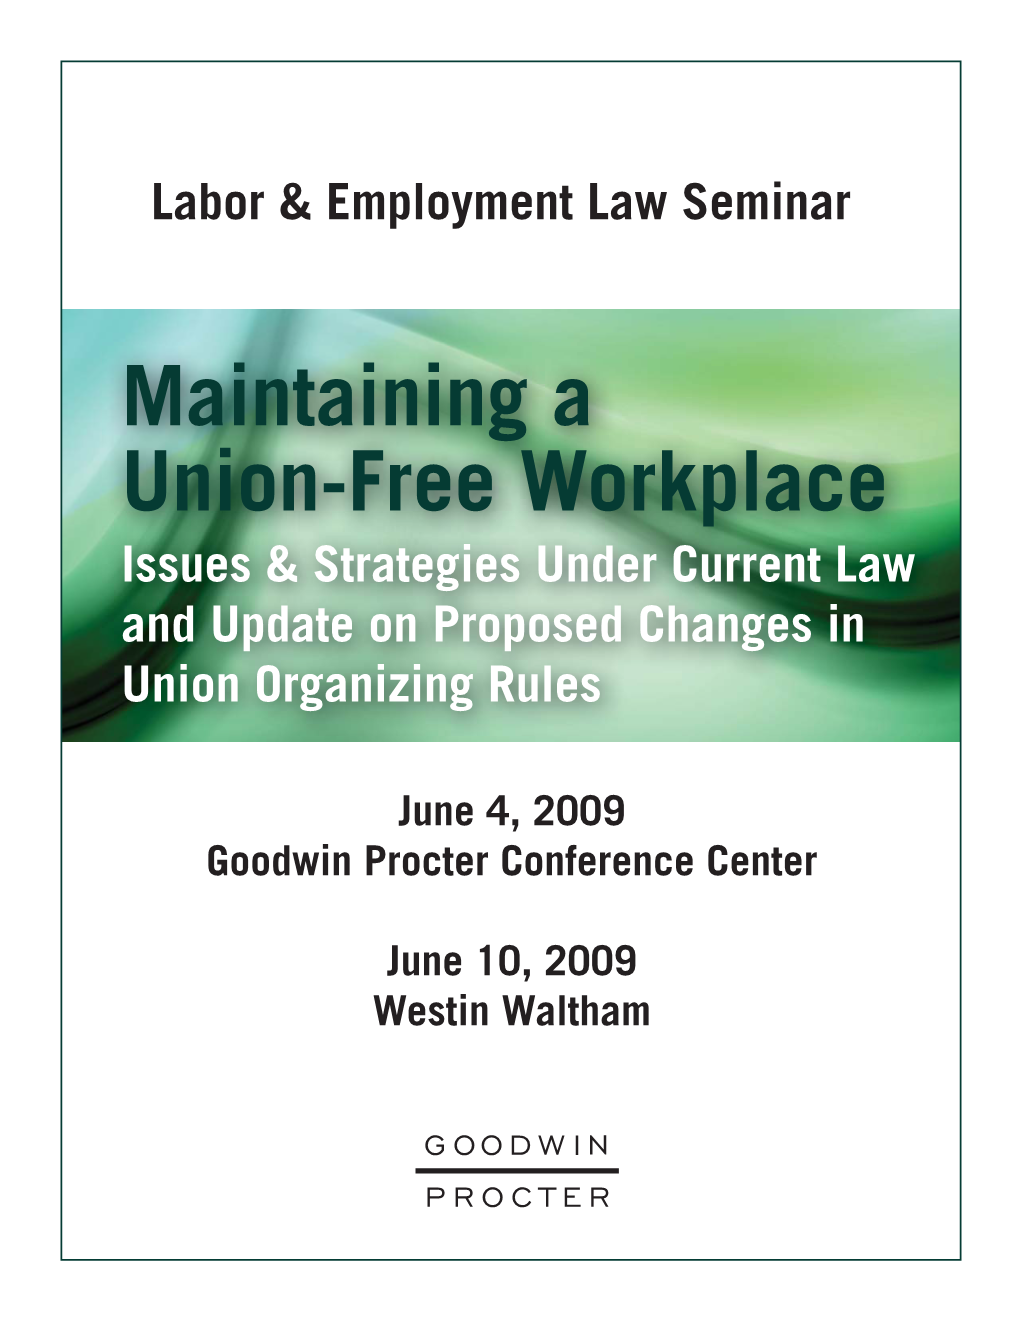 Maintaining a Union-Free Workplace Issues & Strategies Under Current Law and Update on Proposed Changes in Union Organizing Rules